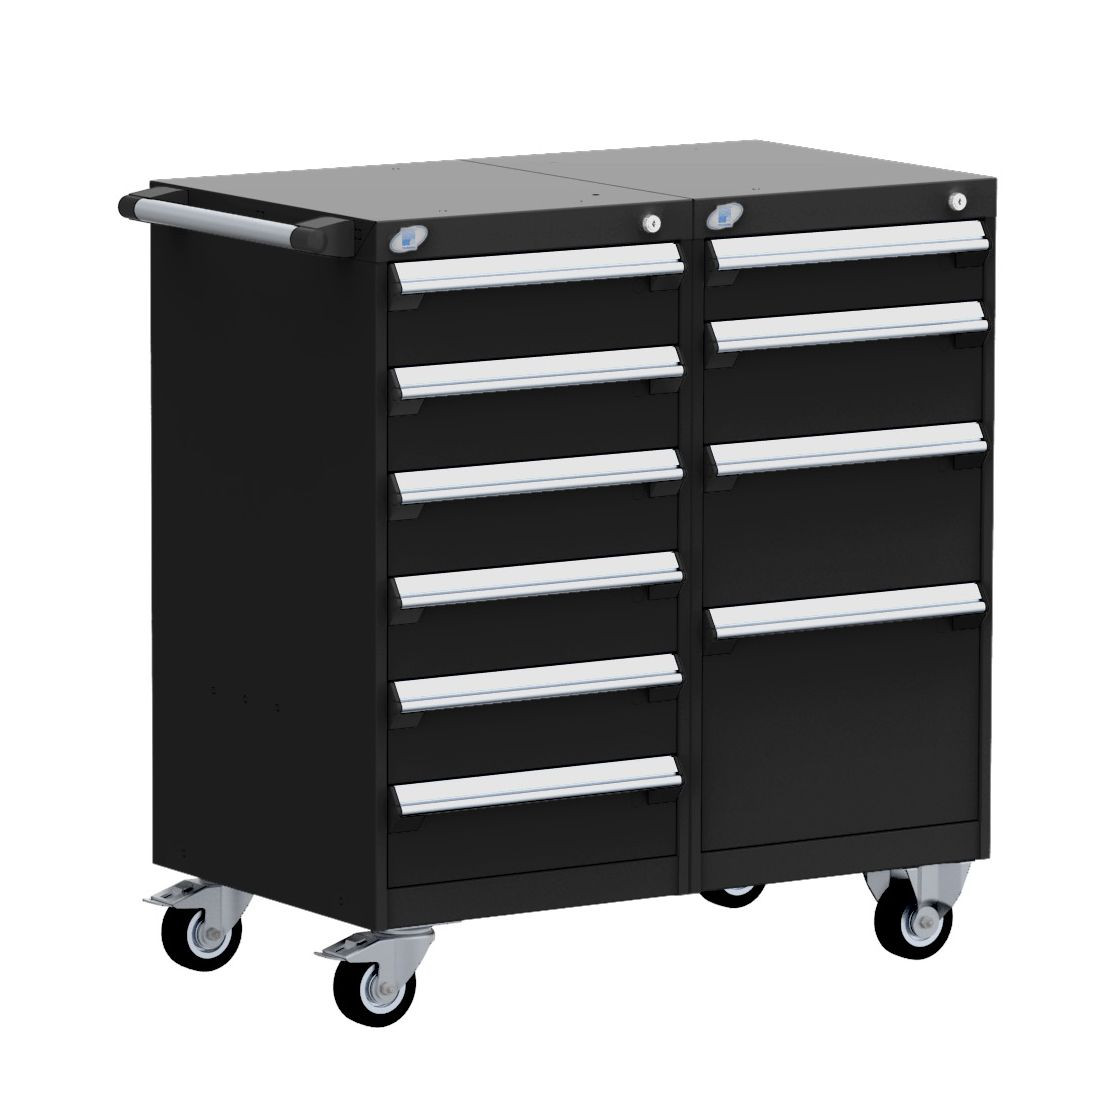 Standard Mobile Double Bank Drawer Cabinet, 10 Drawers, 36 x 27